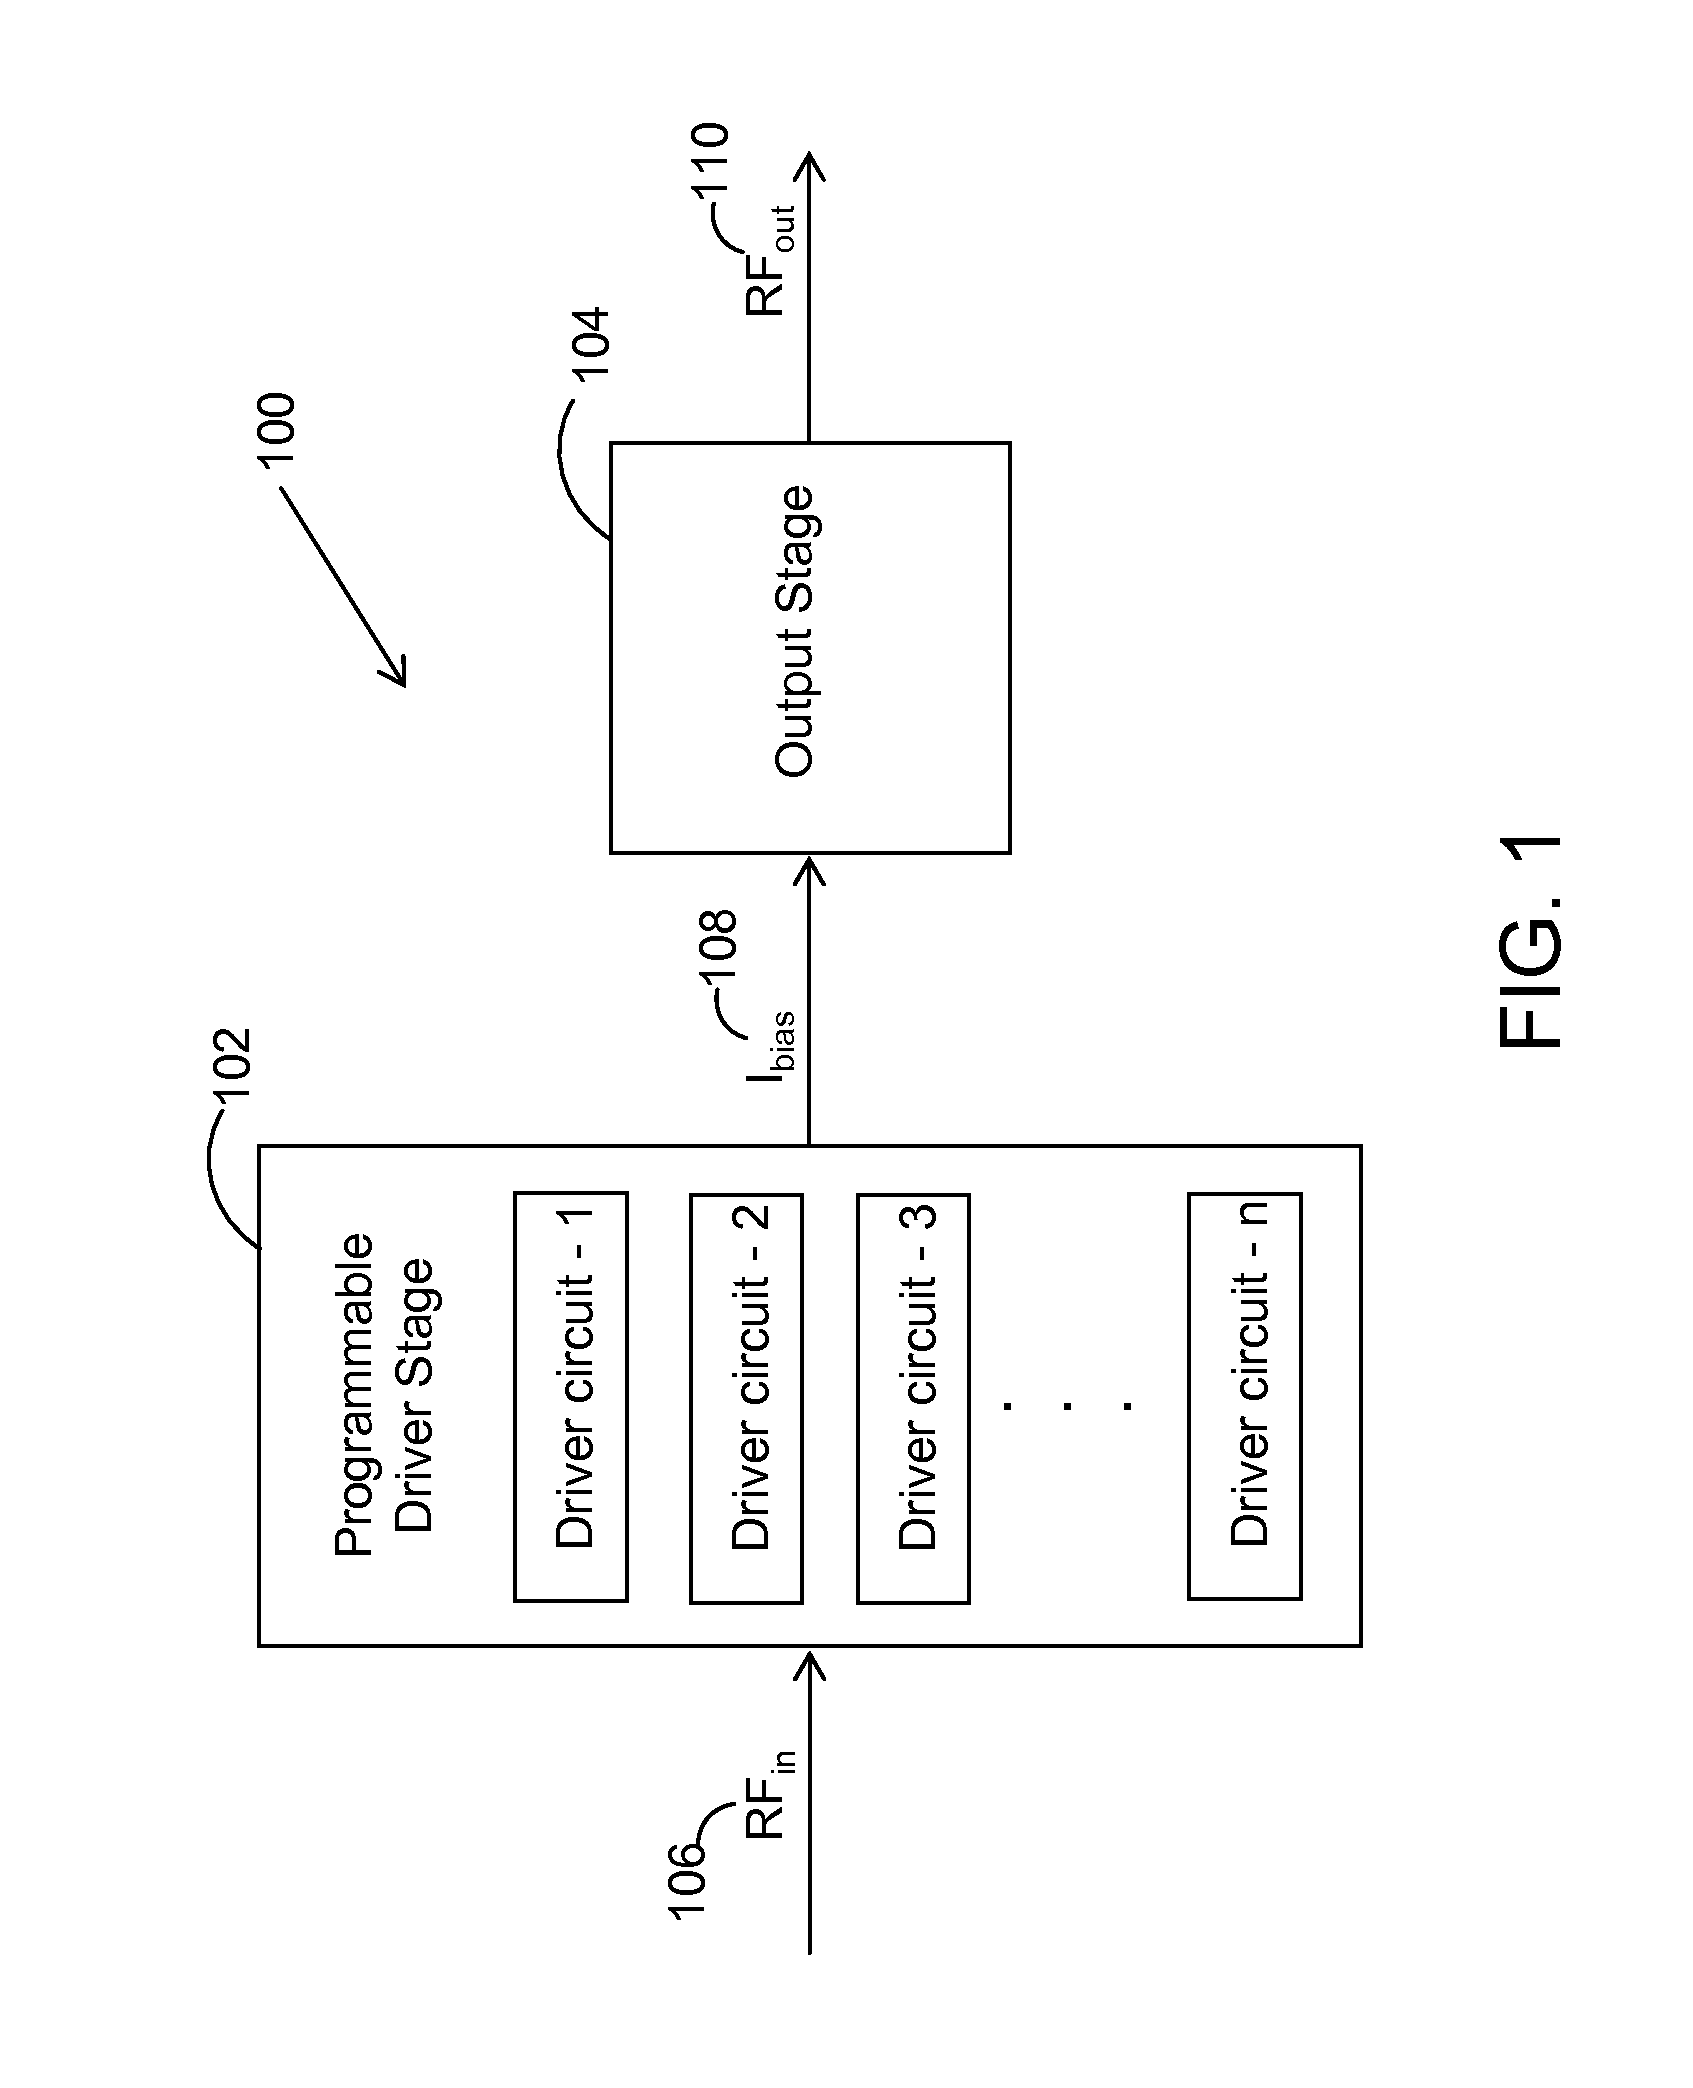 Direct DC coupled push-pull BJT driver for power amplifier with built-in gain and bias current signal dependent expansion